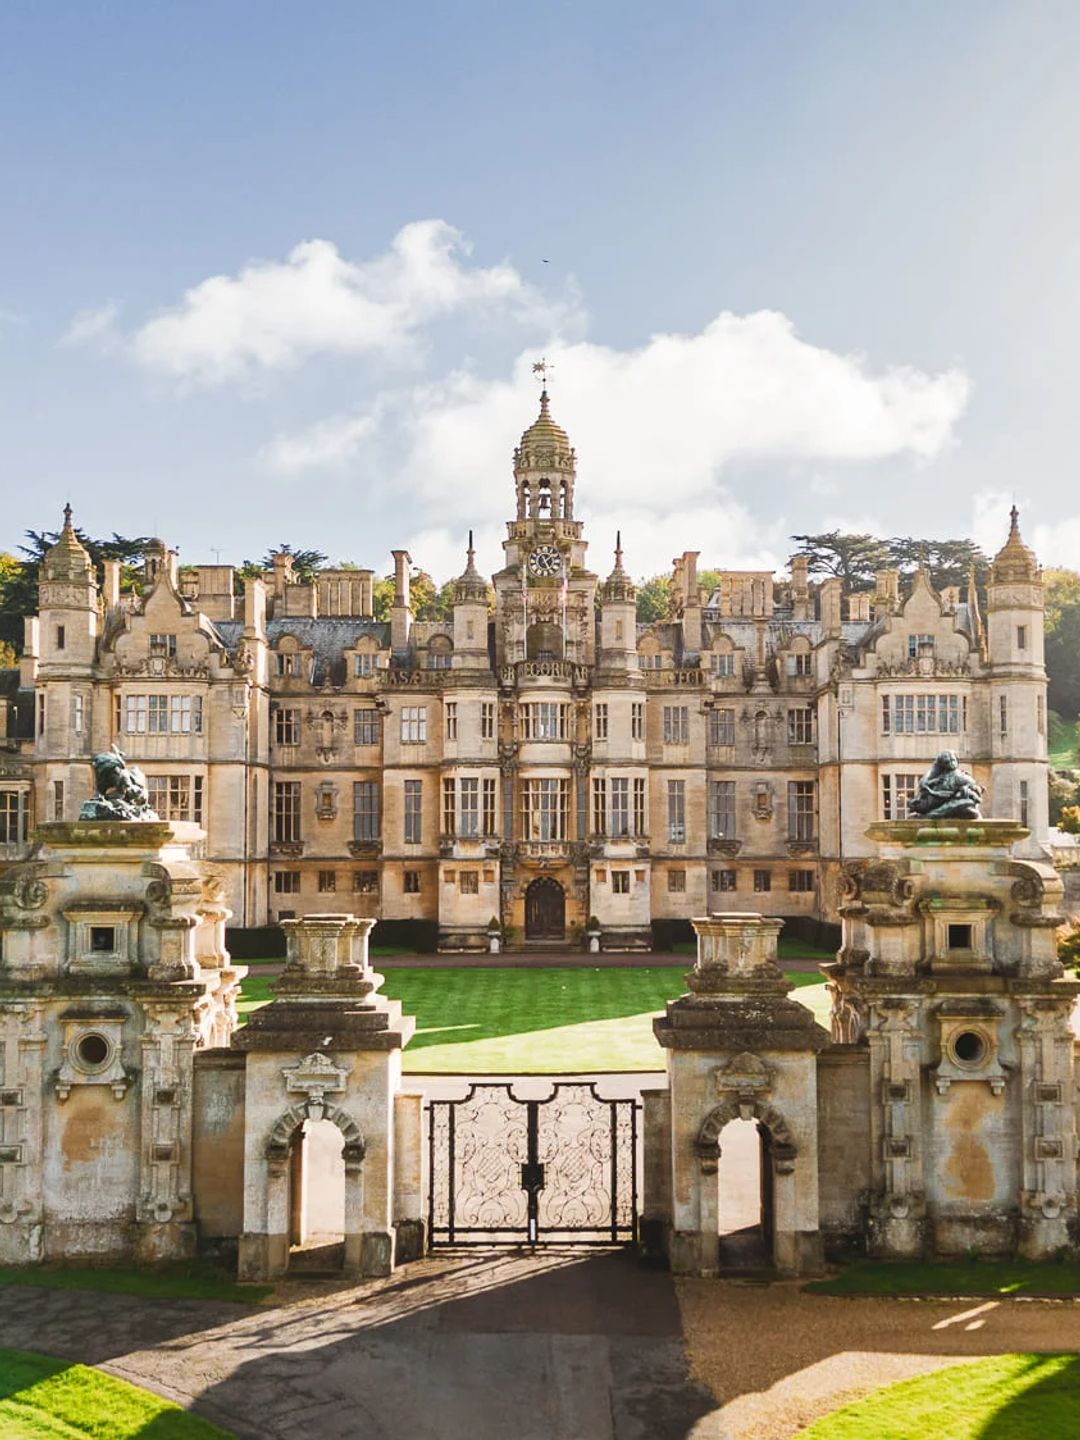 Harlaxton Manor, a striking example of 19th-century Jacobethan architecture, was constructed in the 1830s